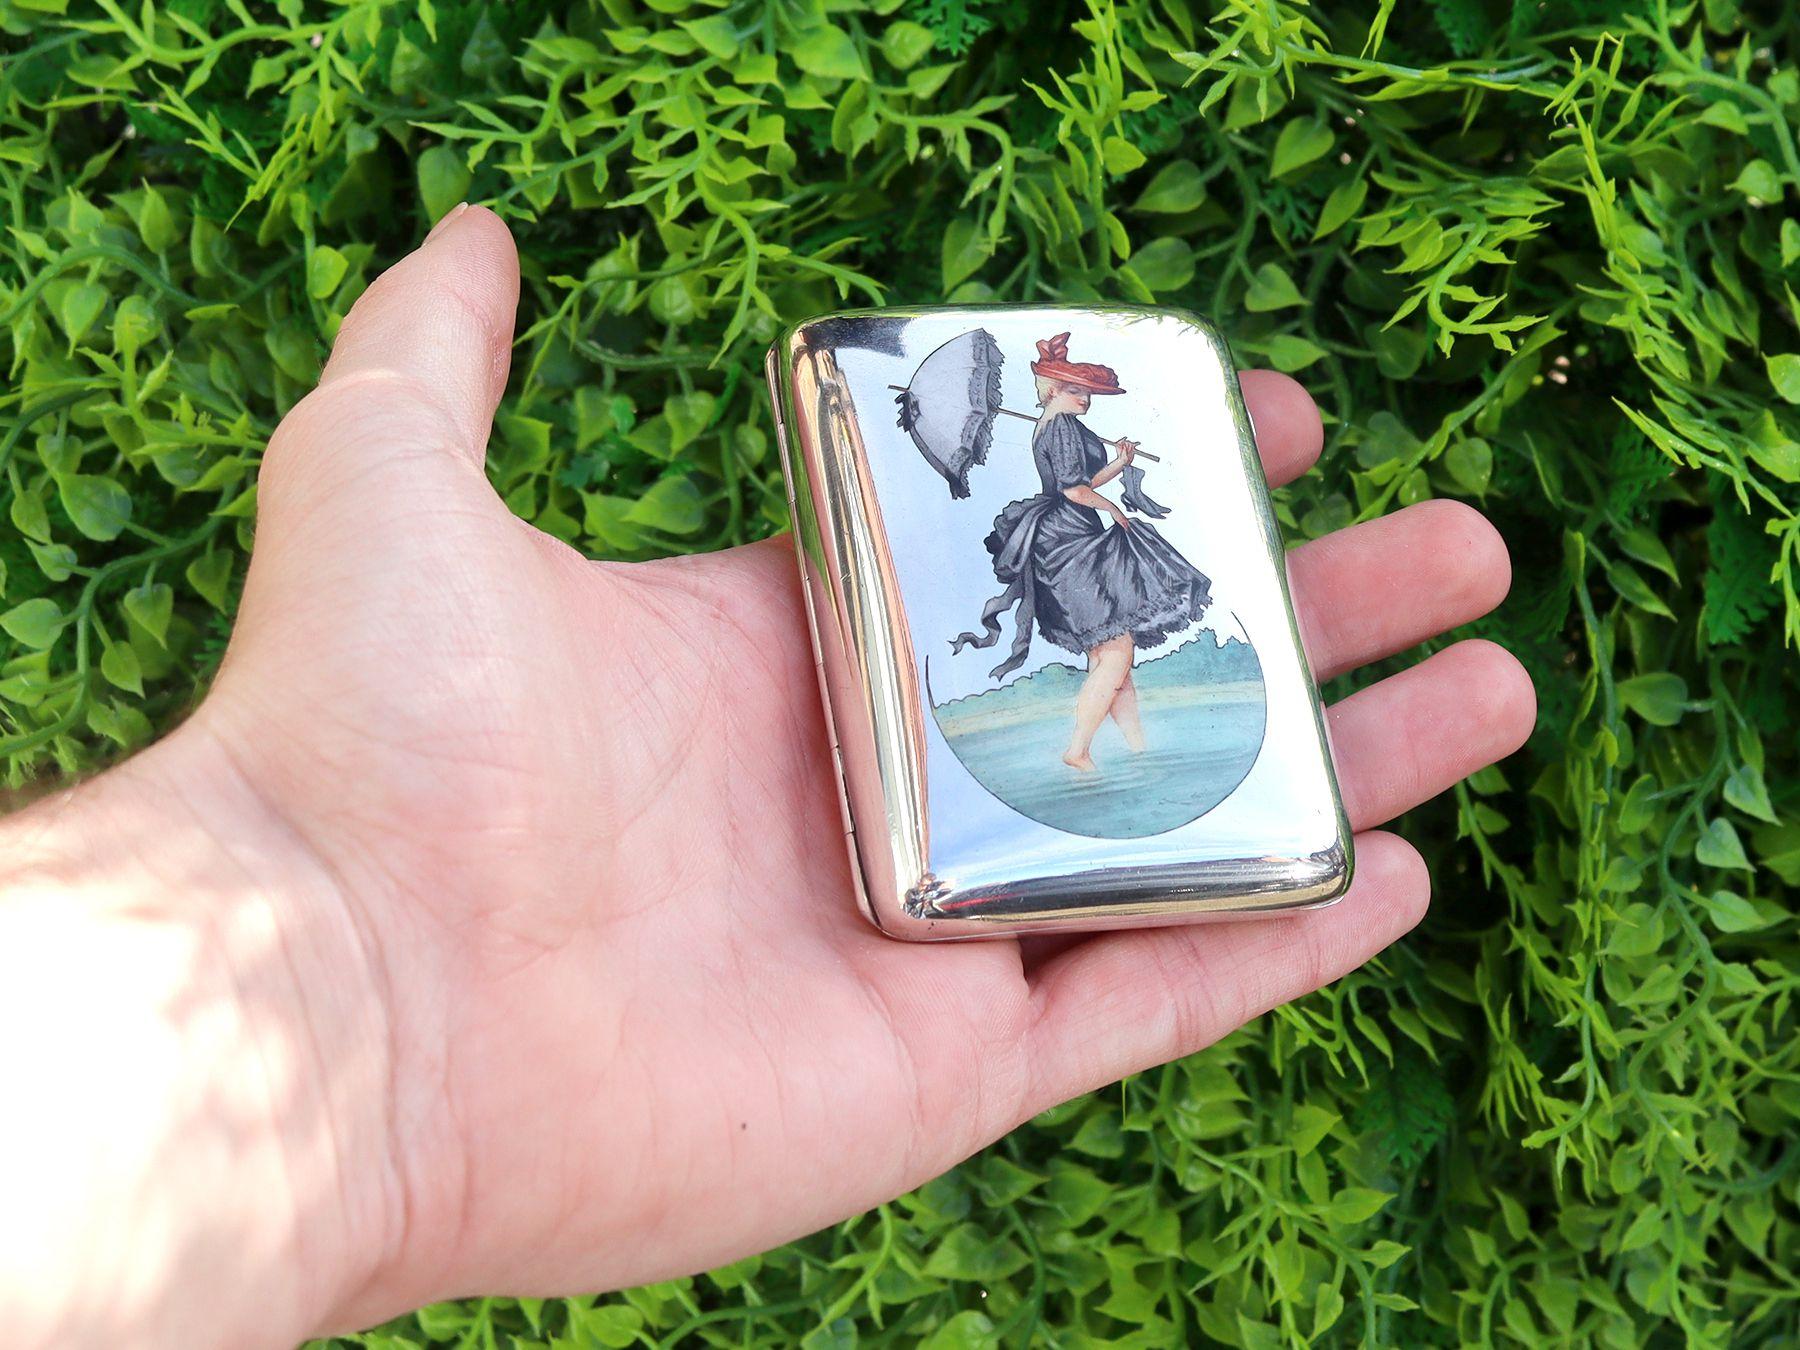 An exceptional, fine and impressive antique Austrian 800 standard silver and enamel cigarette case; an addition to our silver smoking related silverware collection.

This exceptional sterling silver cigarette case has a plain rectangular form with